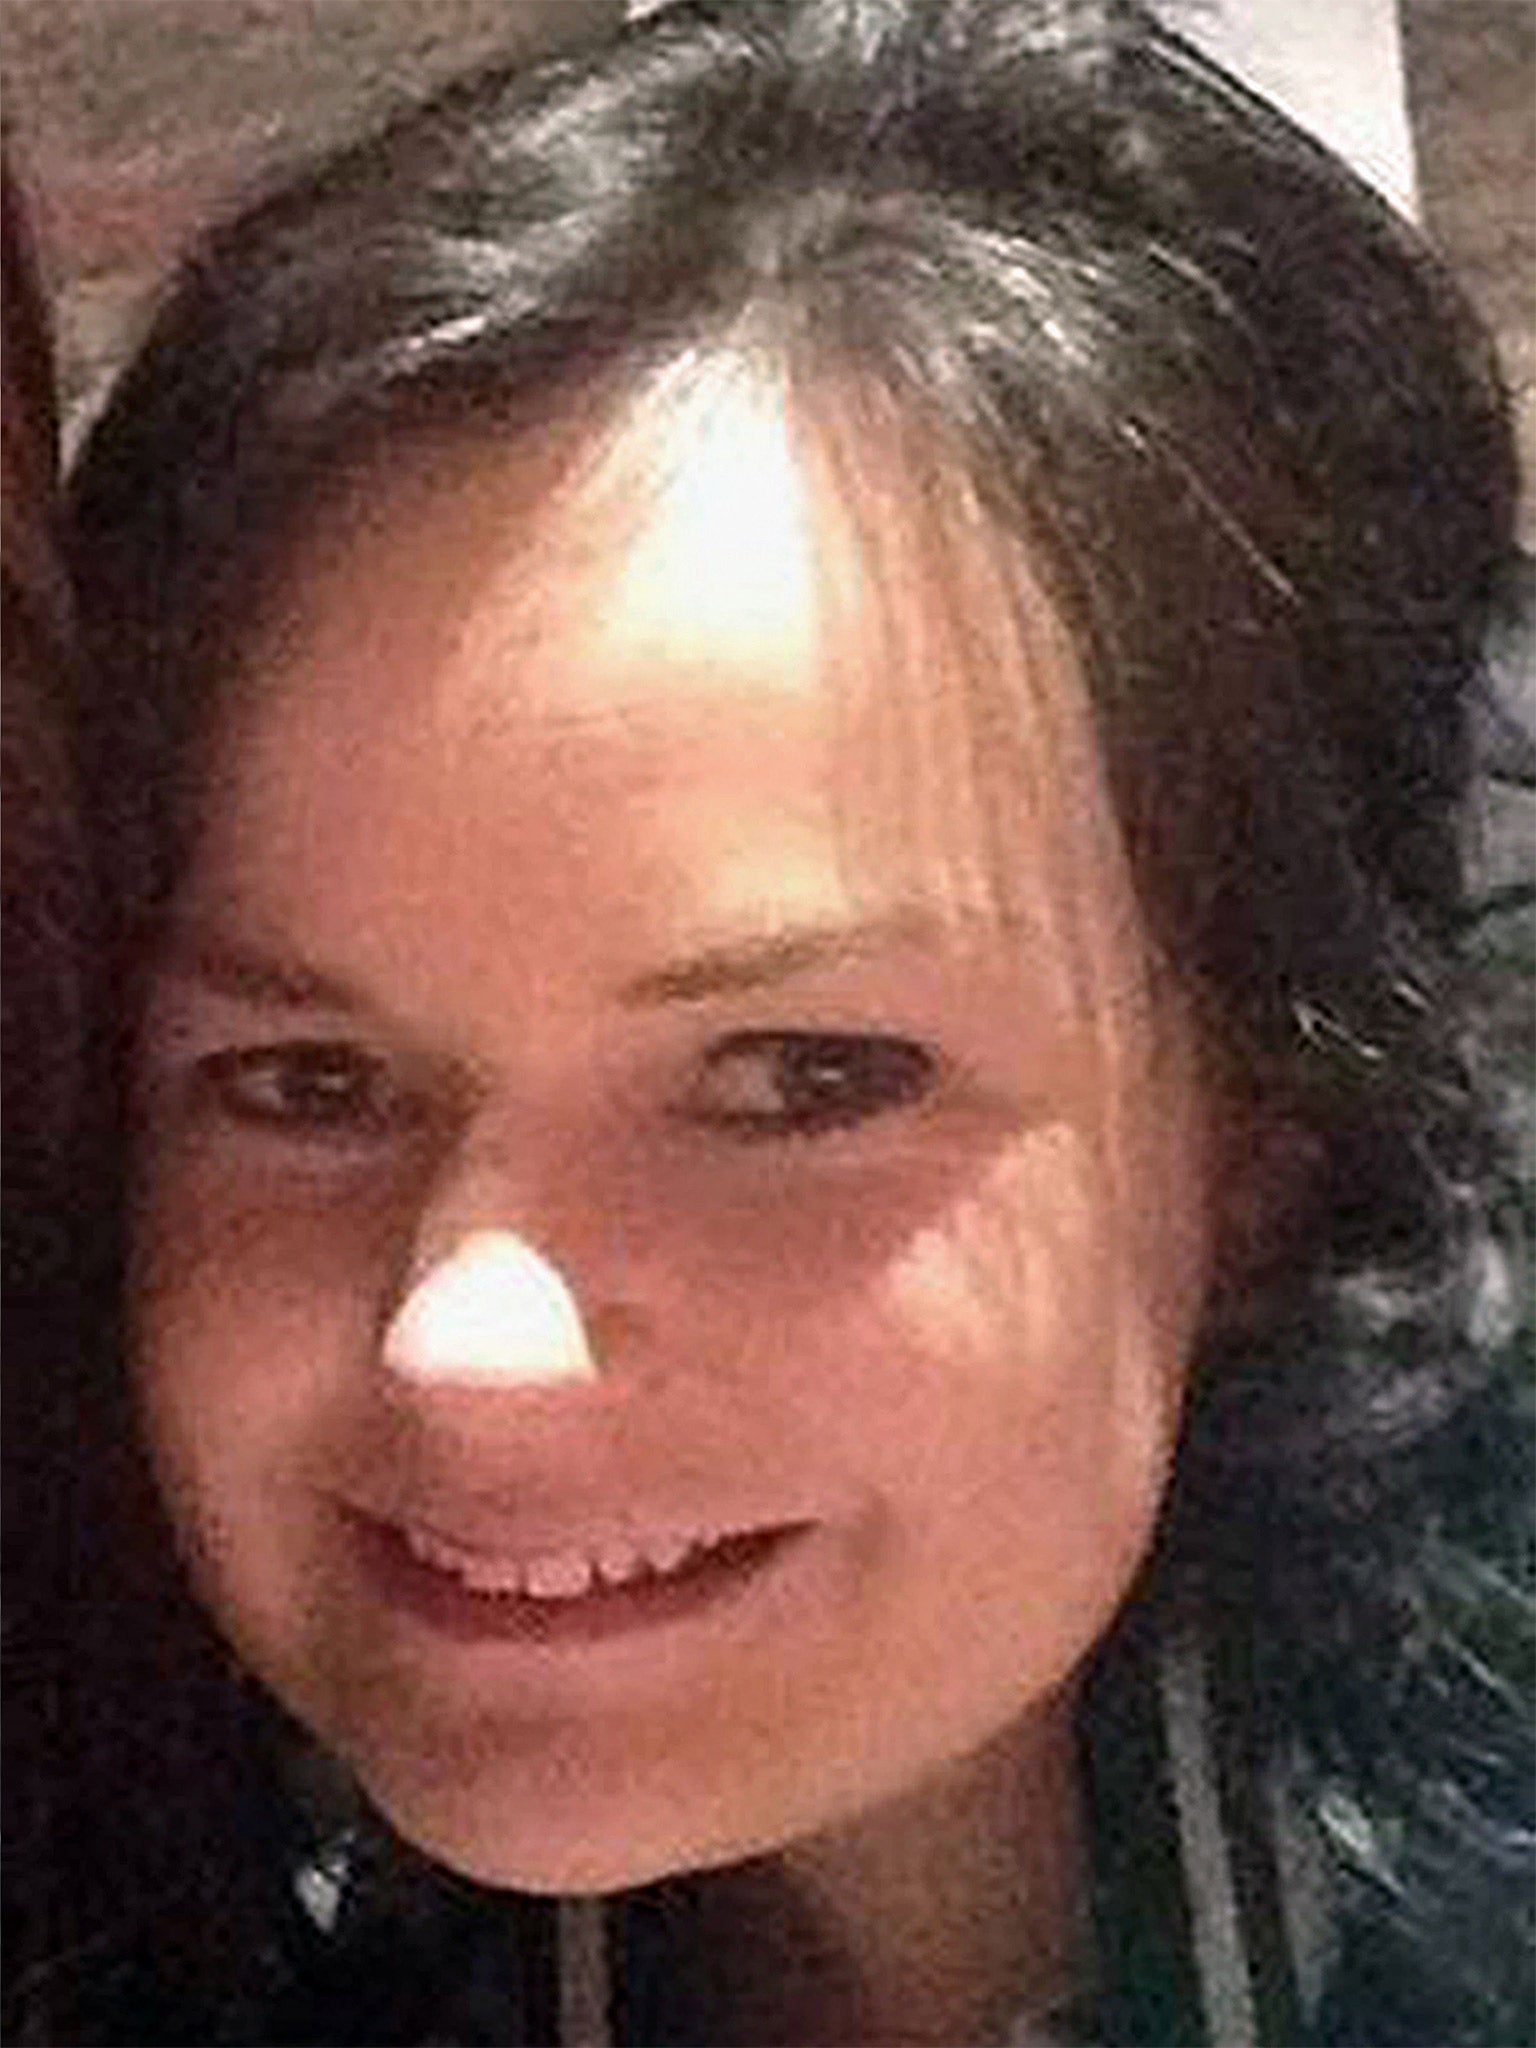 Karen Buckley, 24, from Cork, died after going missing earlier this month